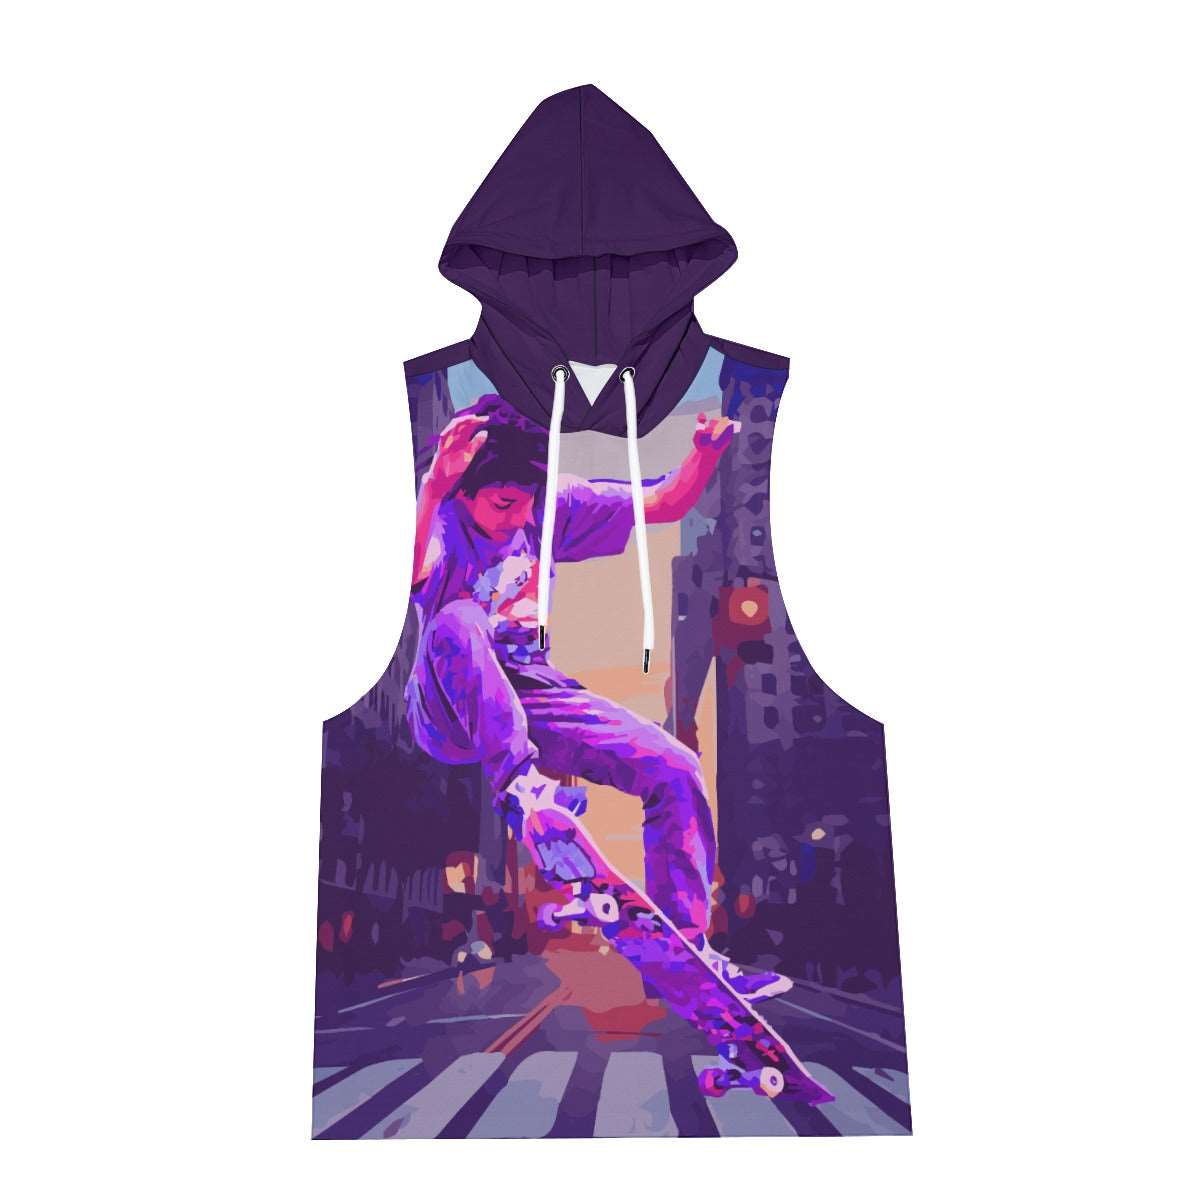 Electric Olly Sleeveless Vest And Shorts Sets